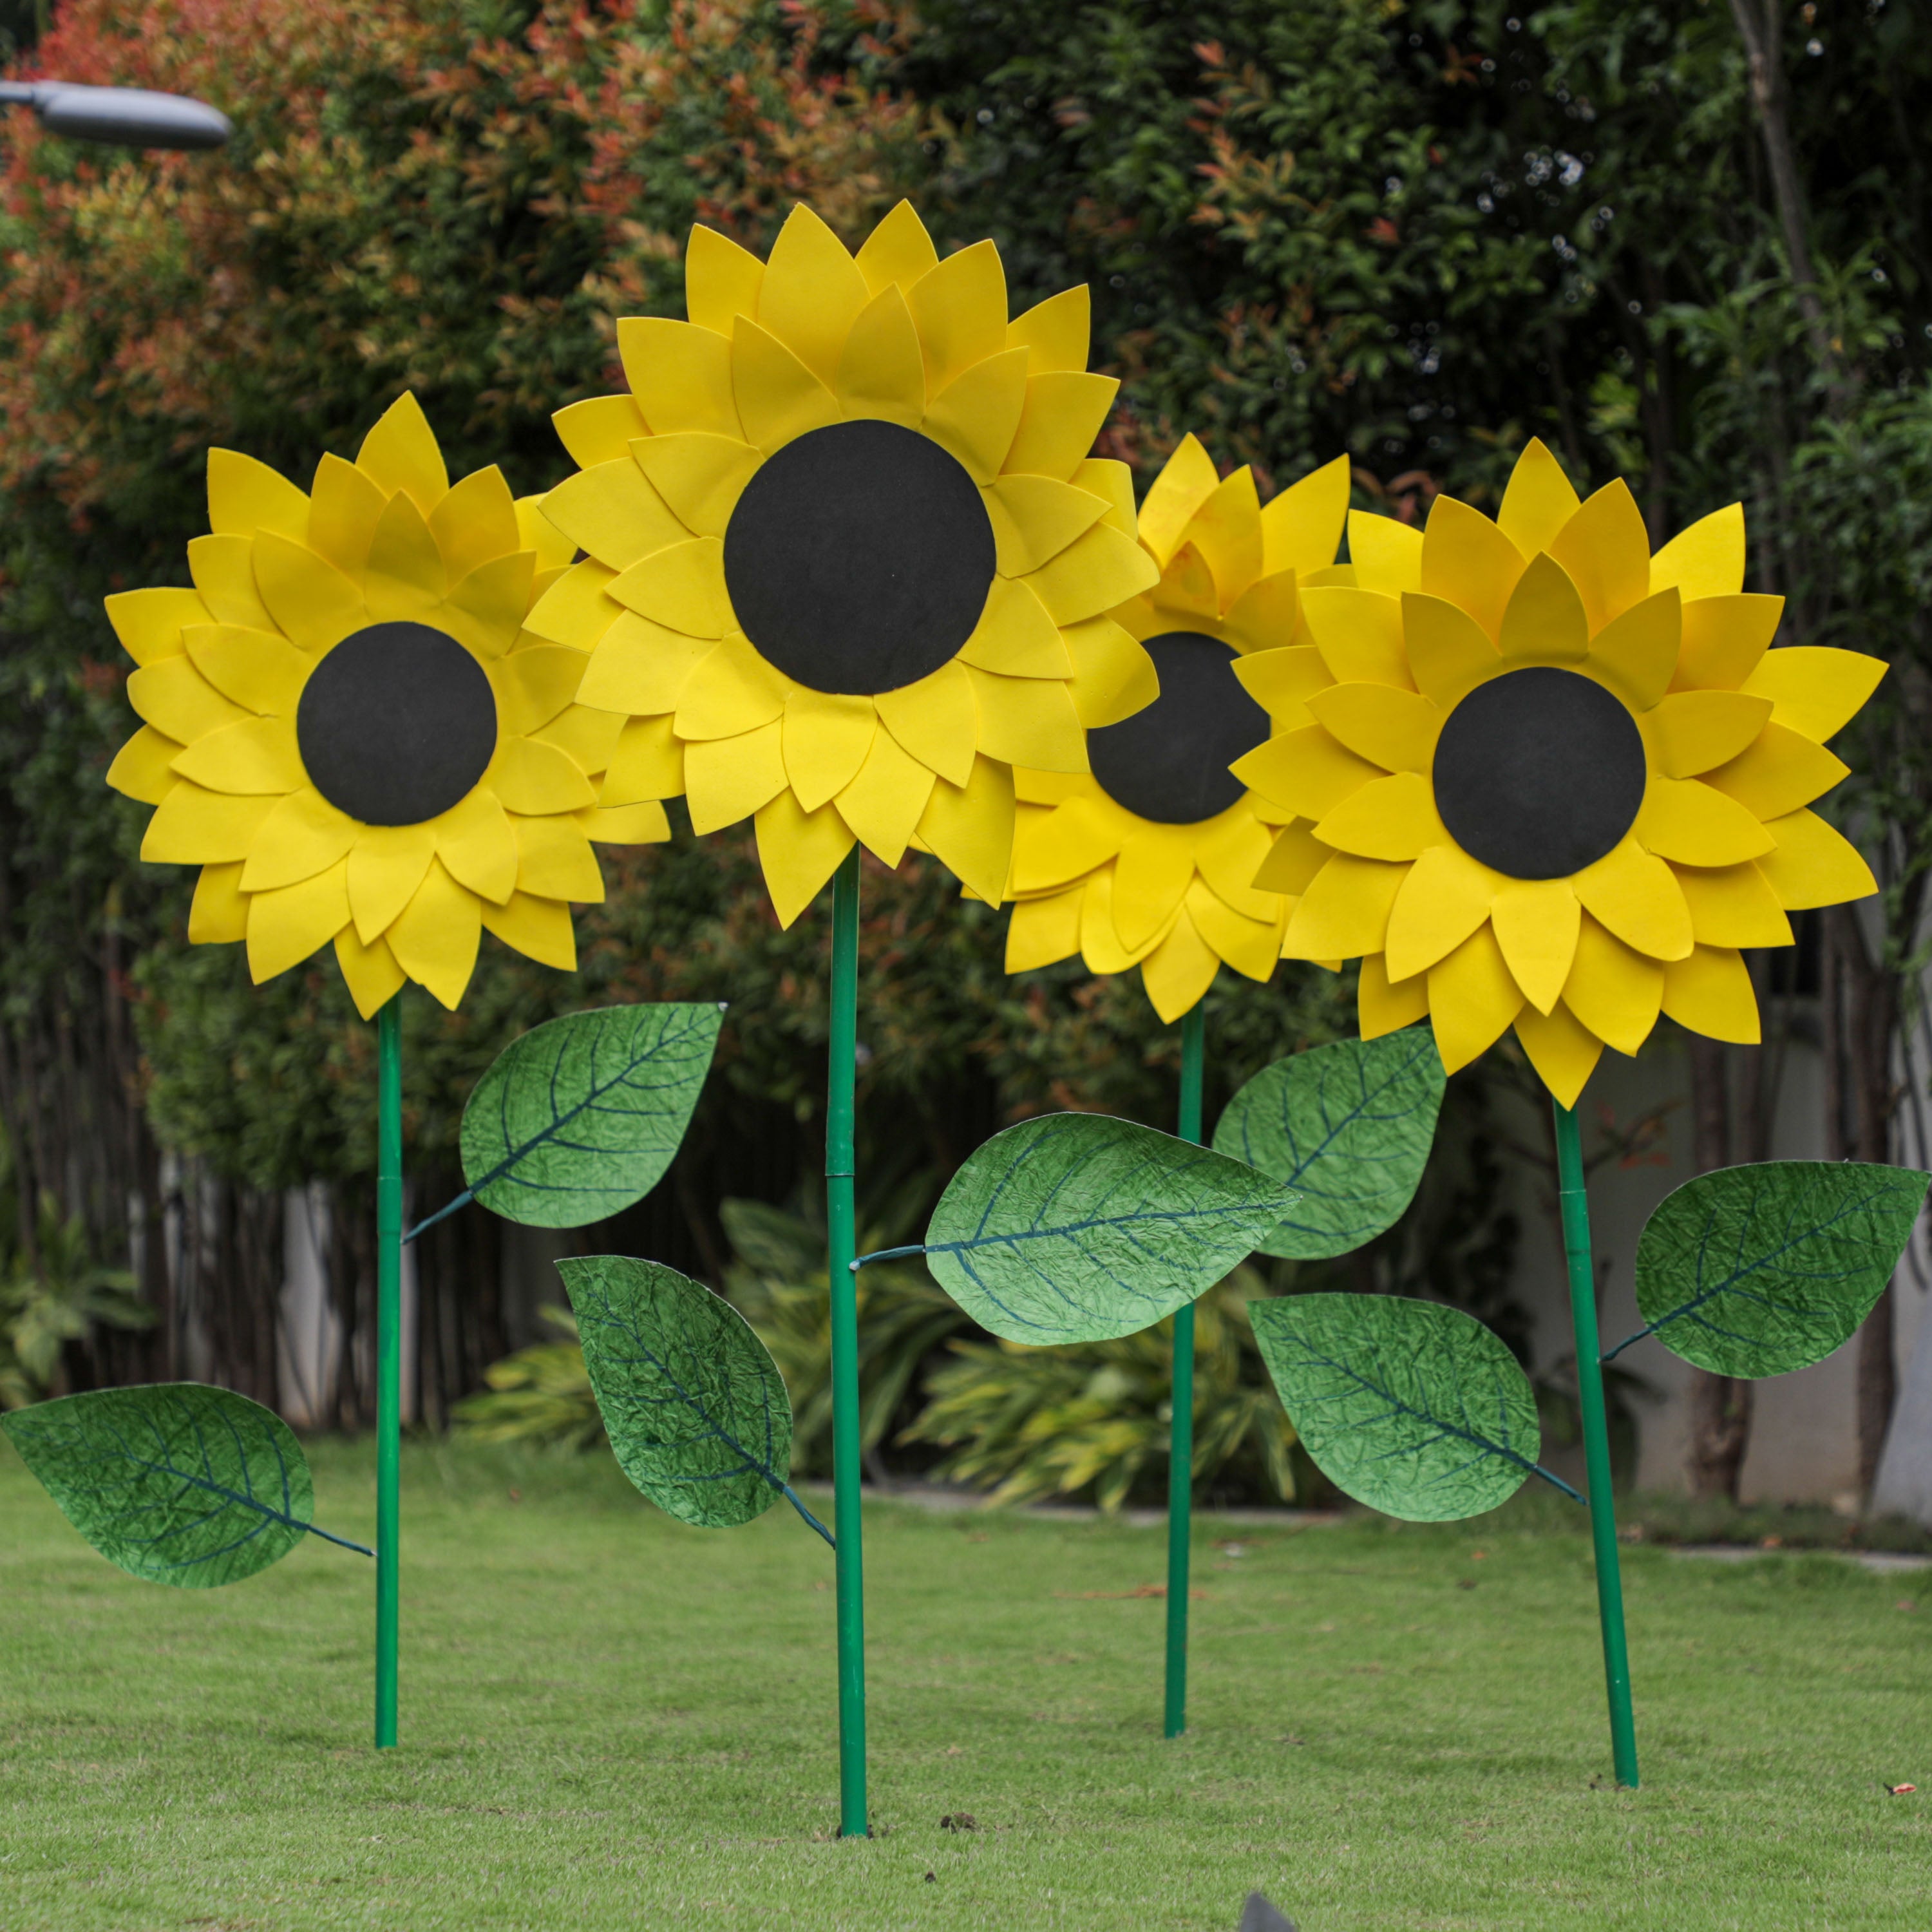 Sunflower themed outdoor decorations